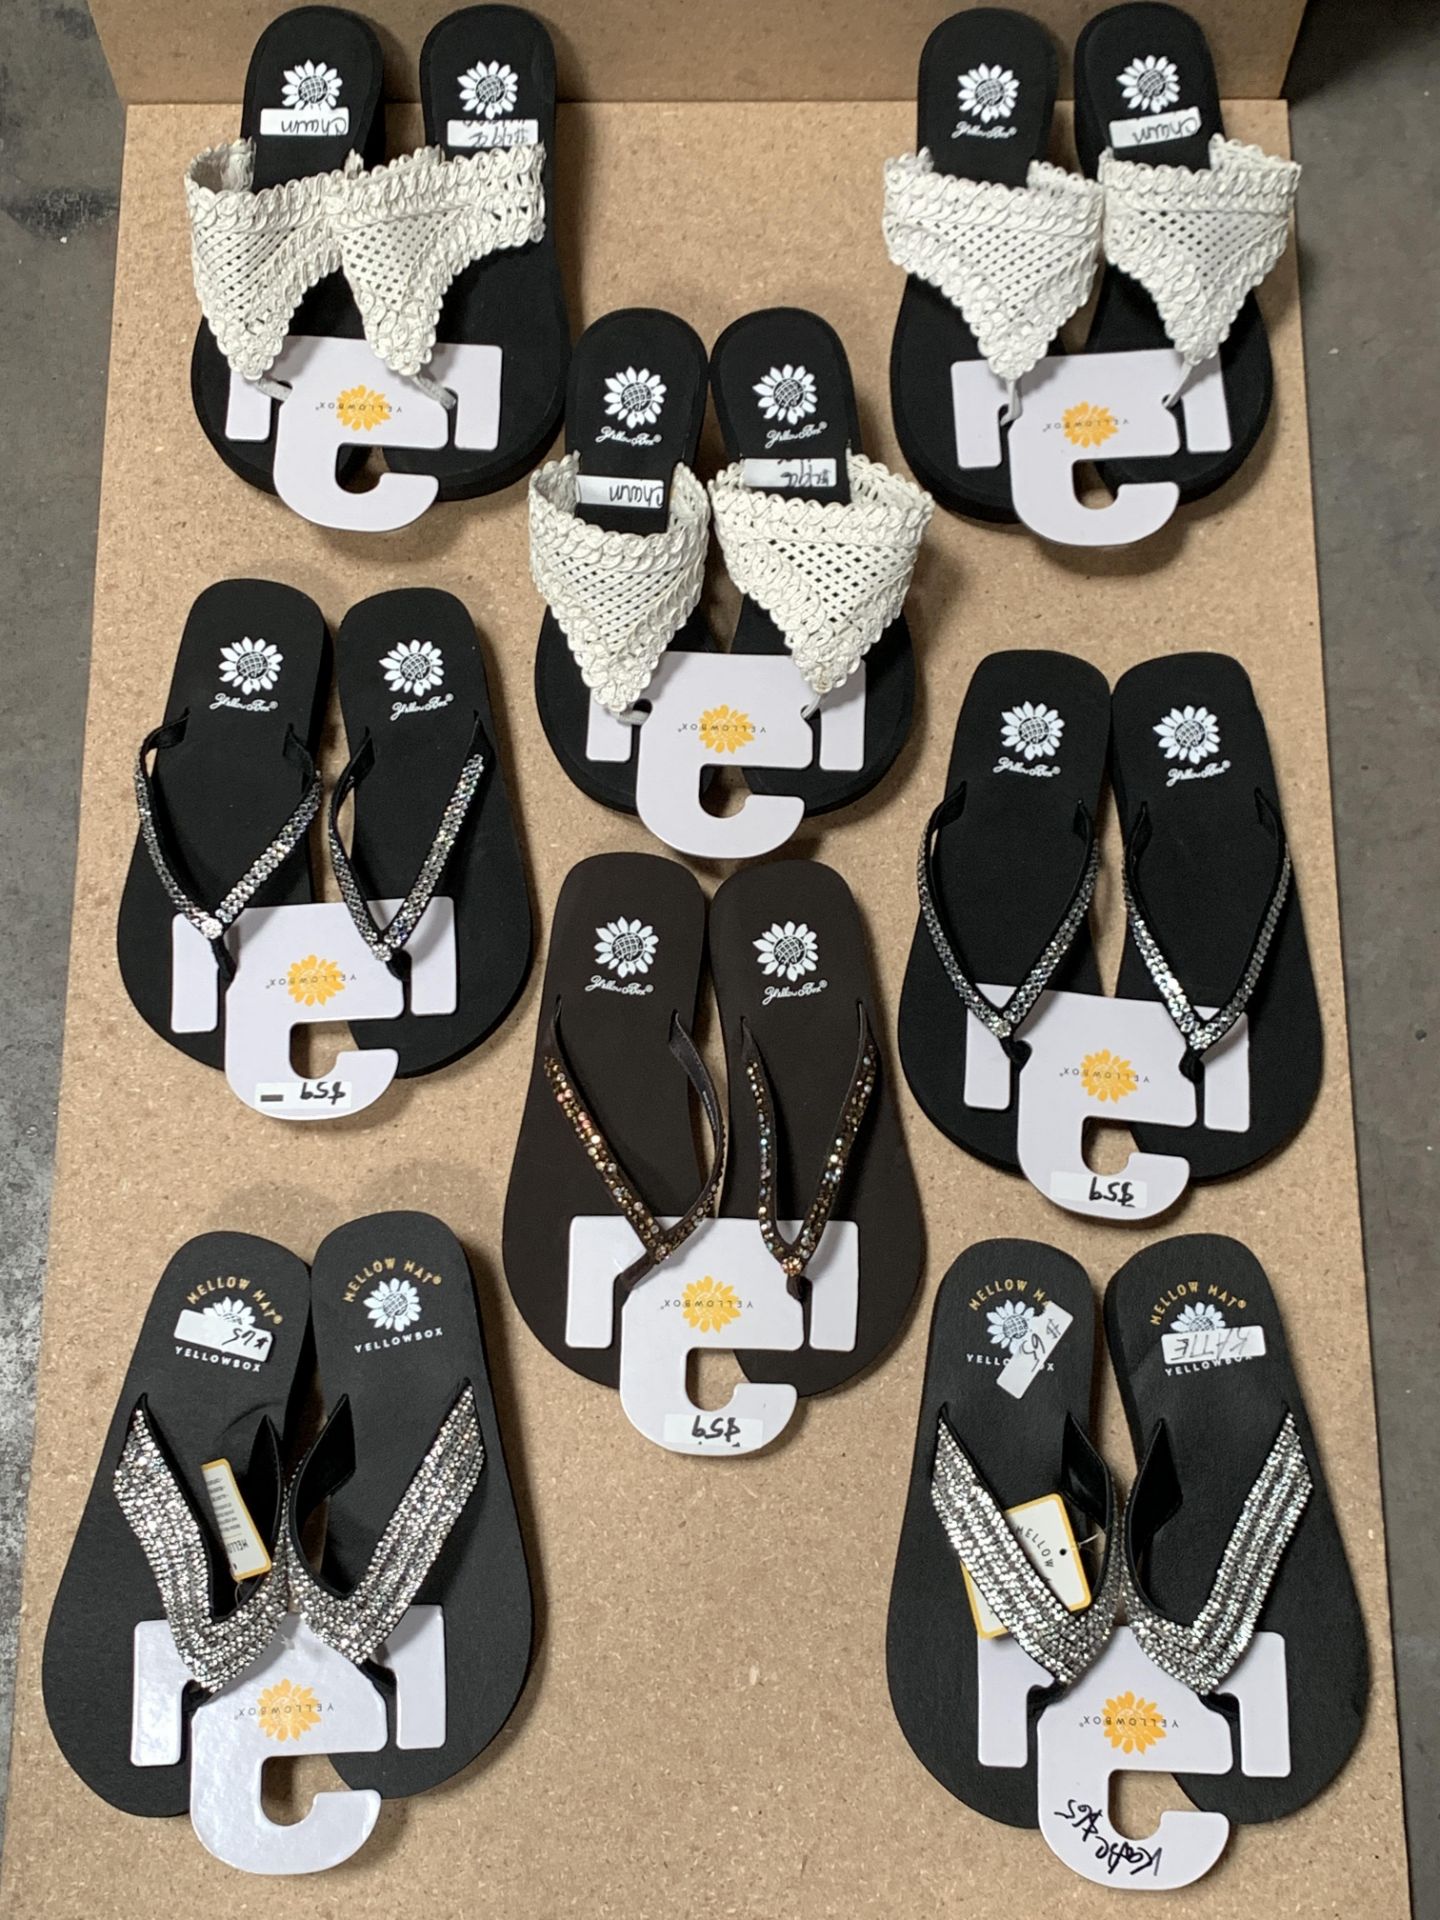 8 Pairs Yellow Box Flip Flop Sandals, New w. Tags, Various Styles and Sizes (Retail $454)